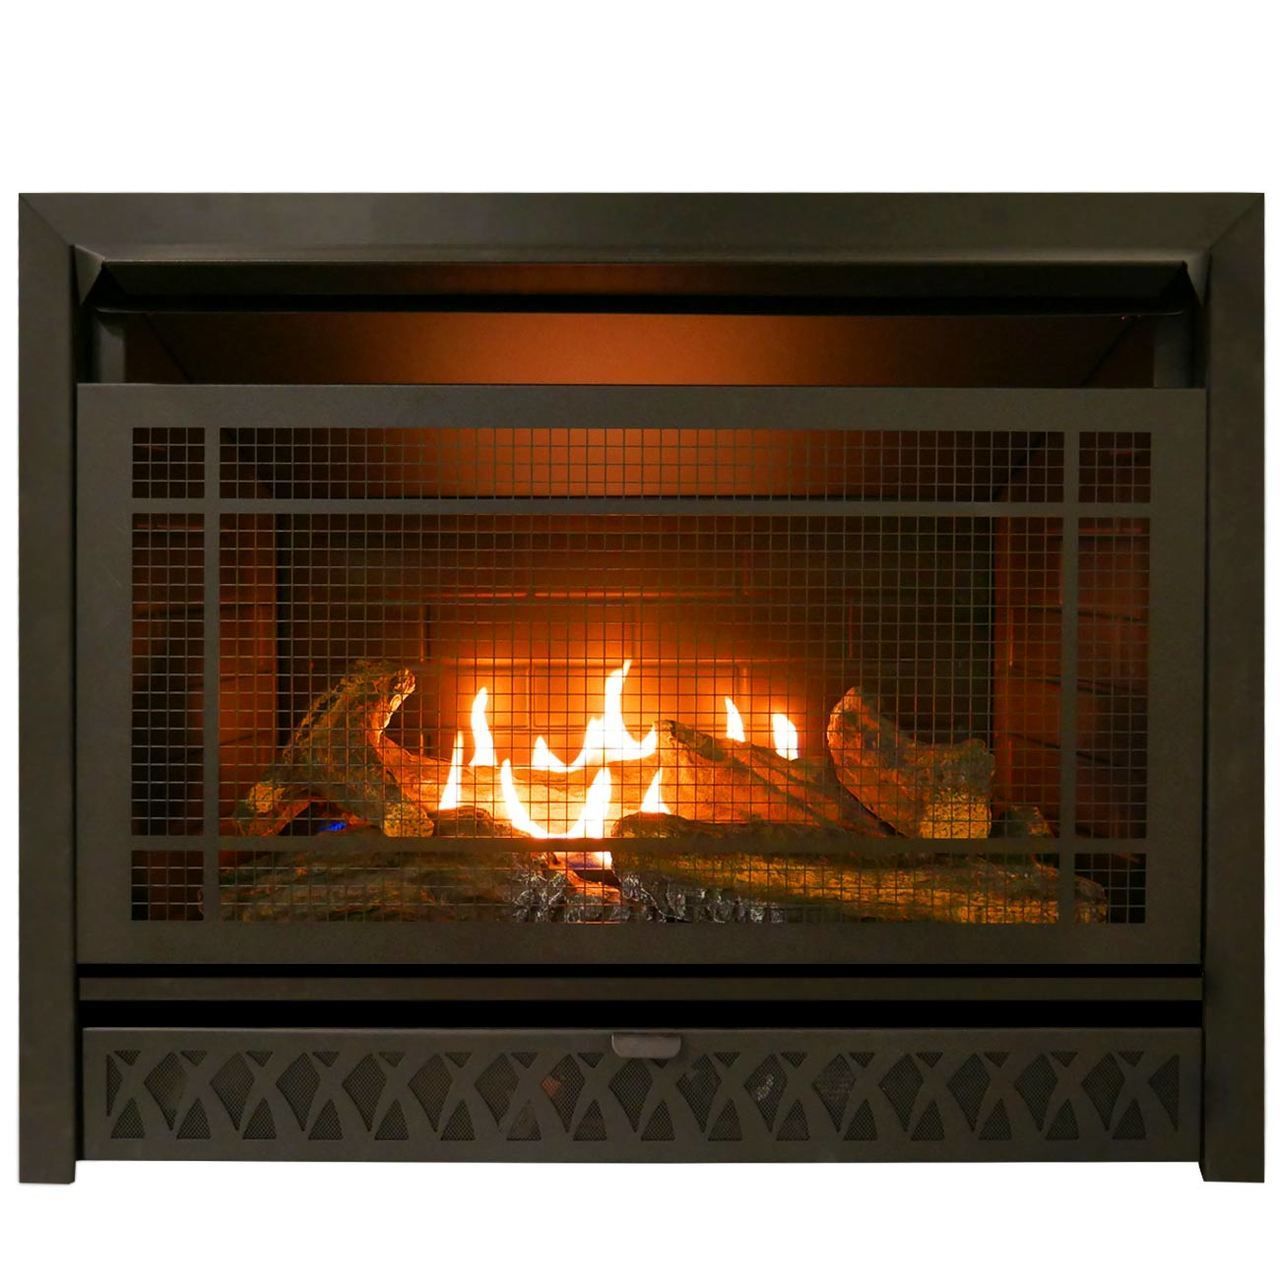 Indoor Fireplace Inserts Best Of Pro Fireplaces 29 In Ventless Dual Fuel Firebox Insert